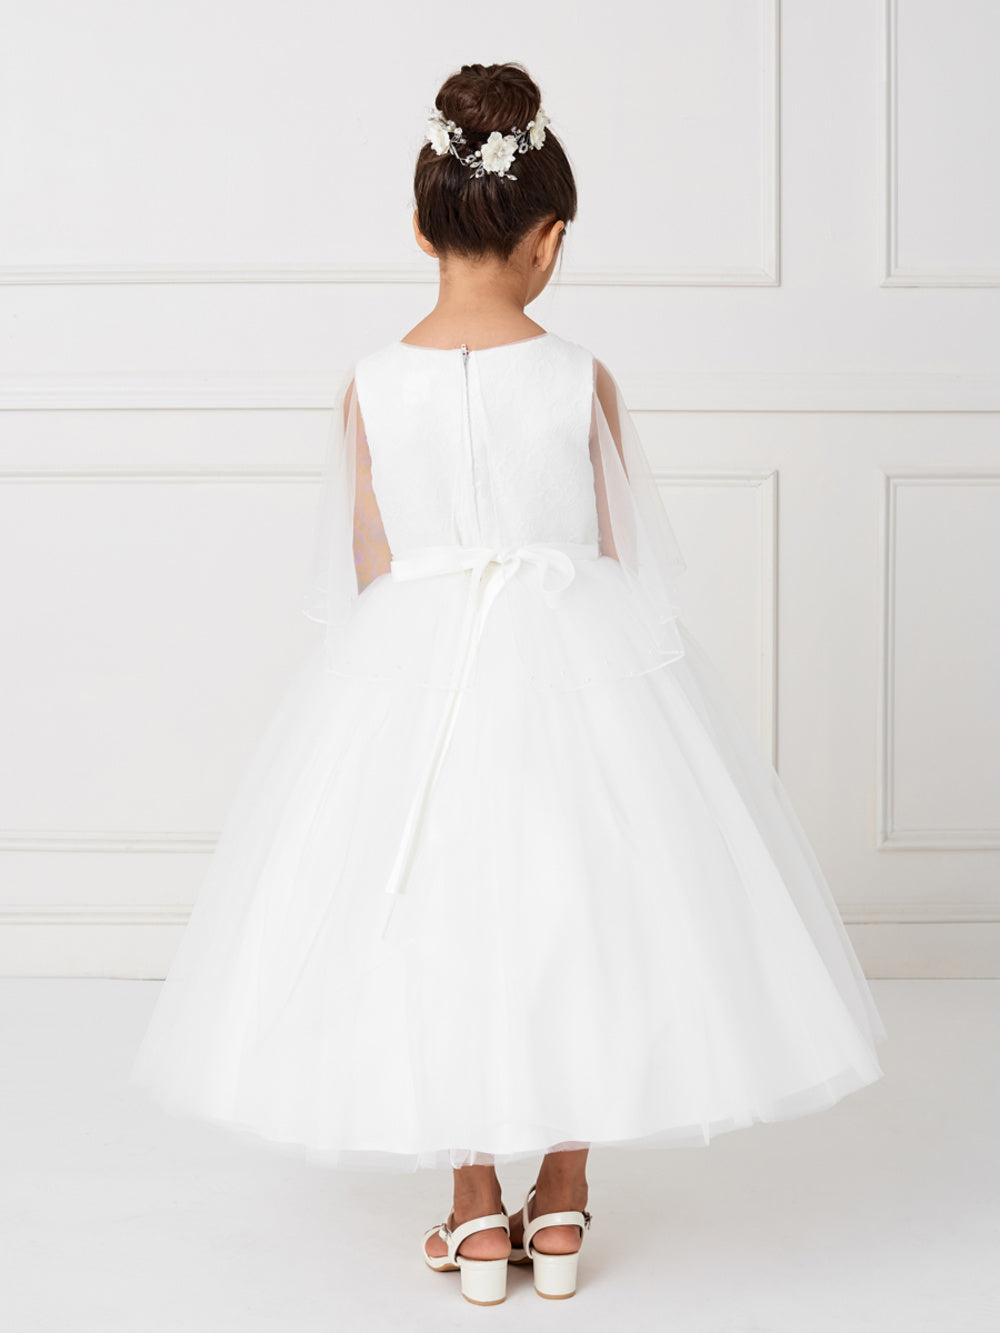 Flower Girl Lace Bodice and tulle Cape Dress by TIPTOP KIDS - AS5793